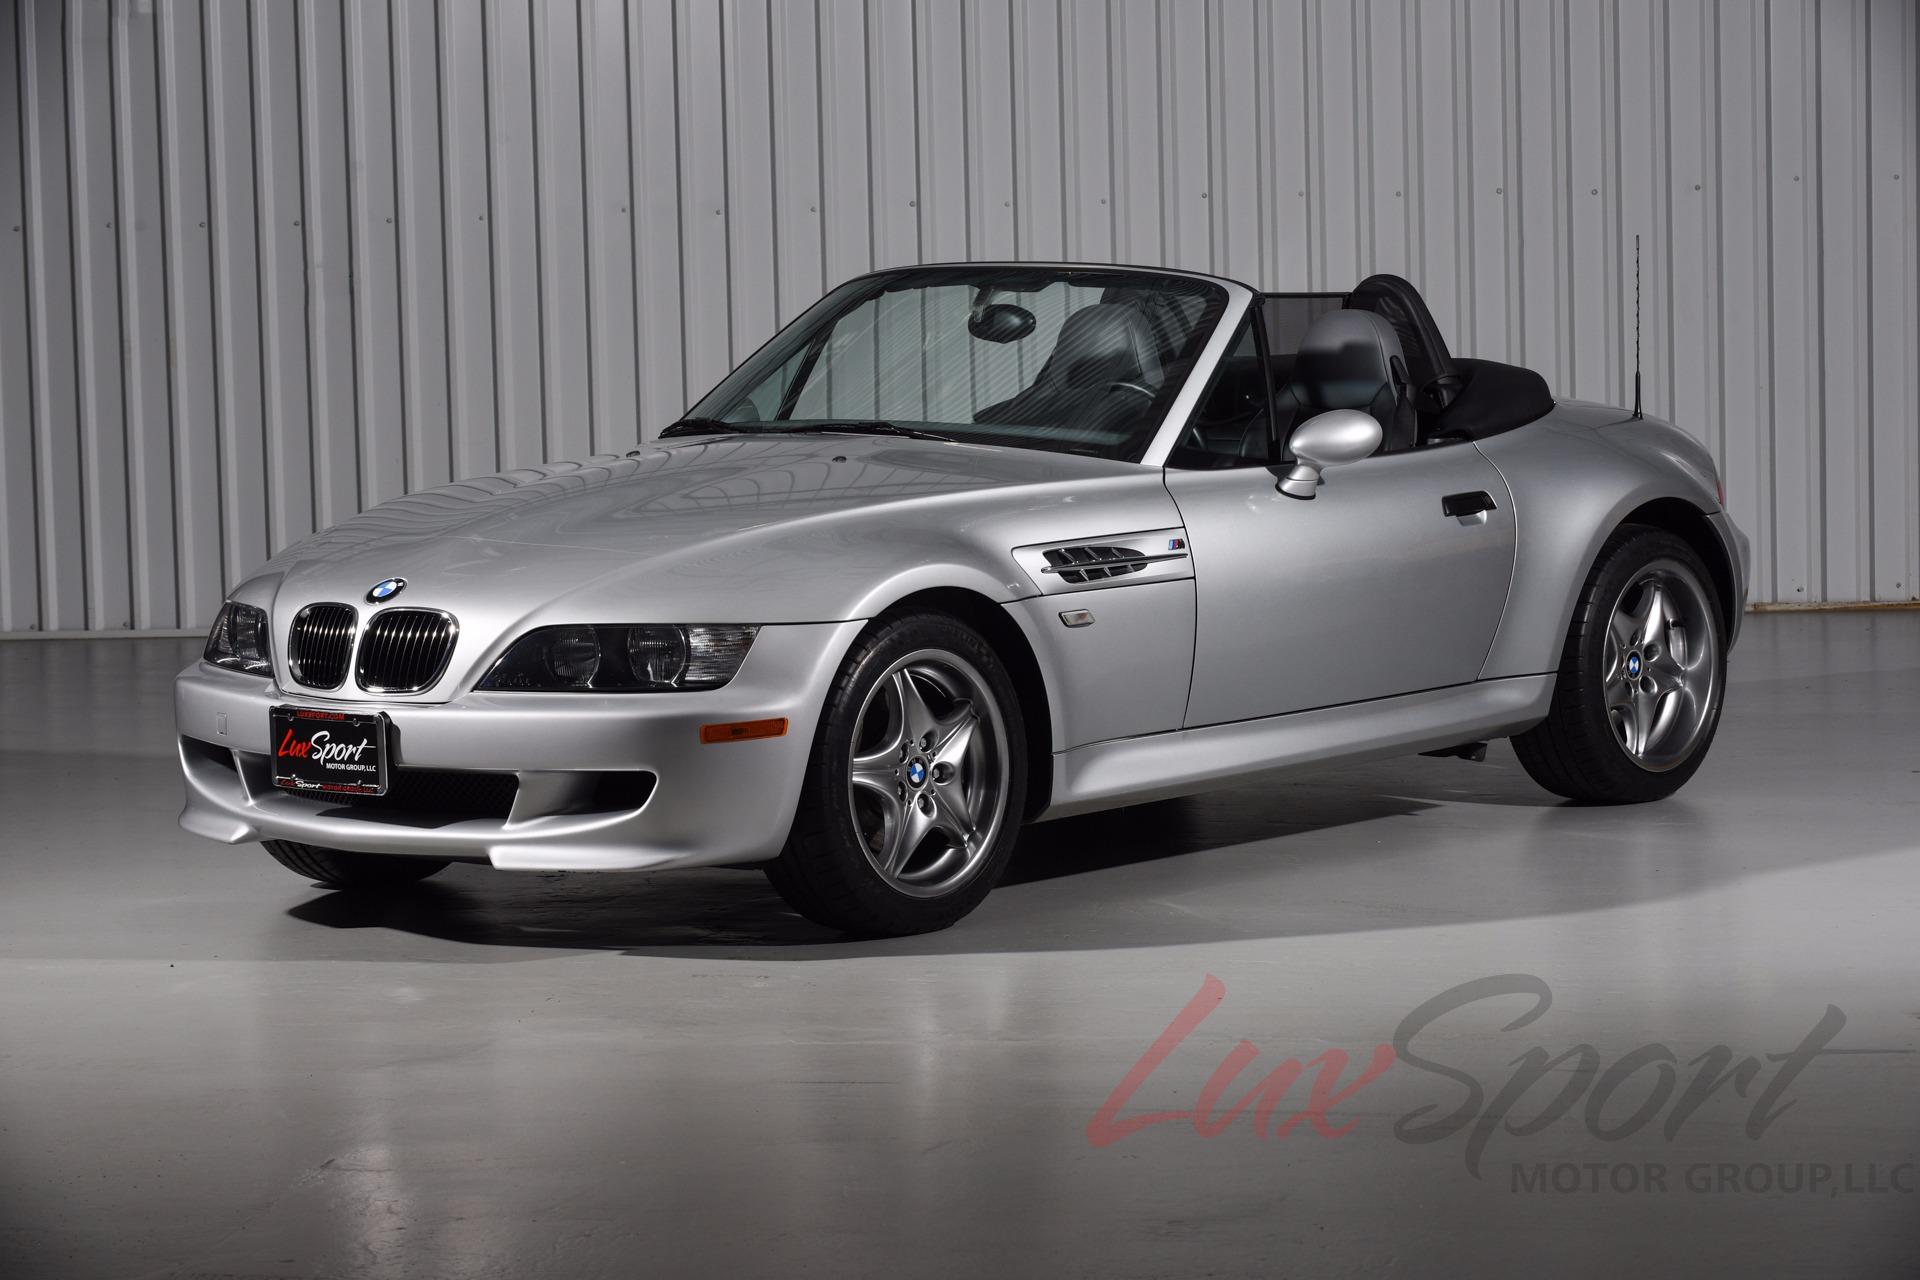 2002 BMW M Roadster Stock # 2002112 for sale near Plainview, NY | NY BMW  Dealer